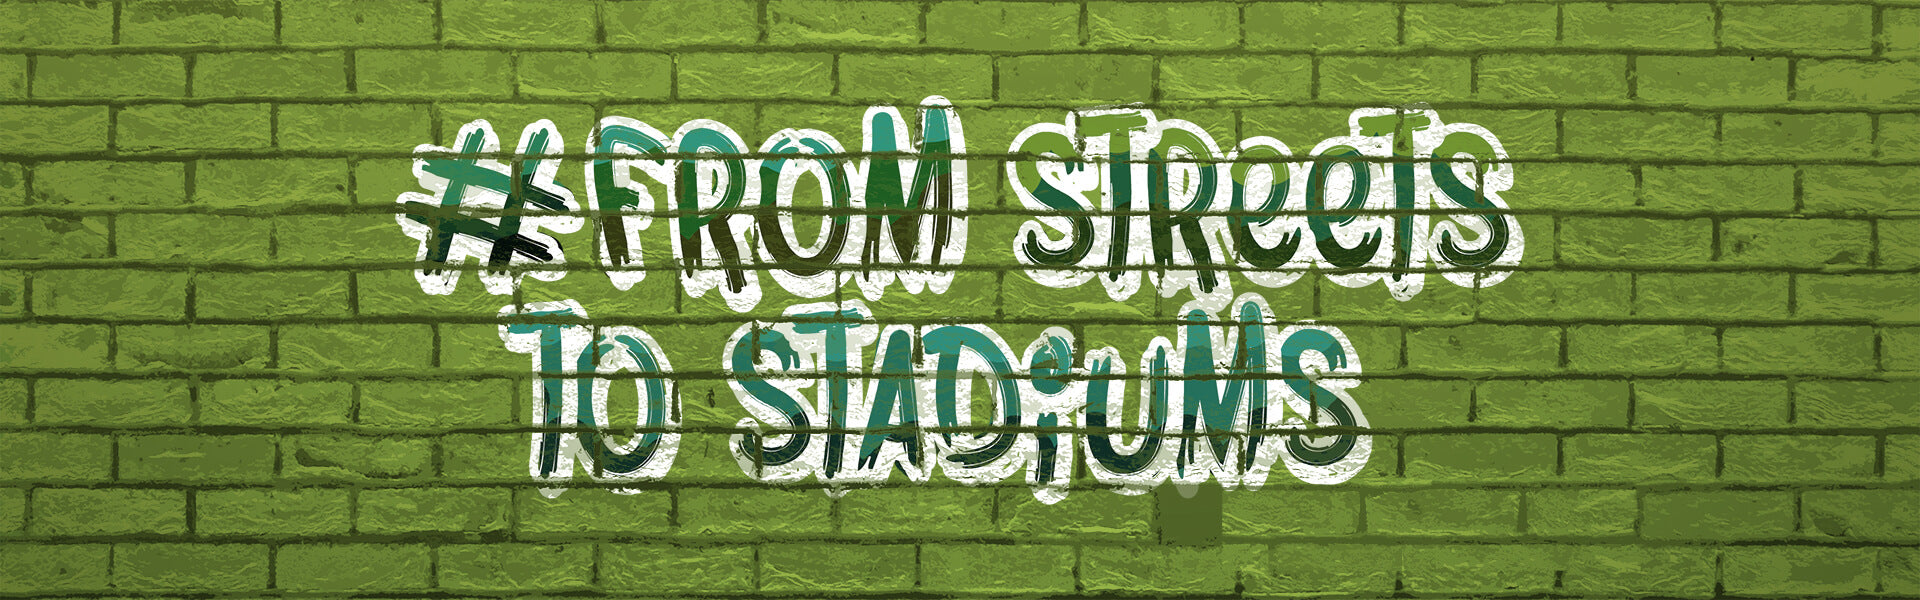 Grassroots Shop, From Streets to Stadium, Desktop Banner